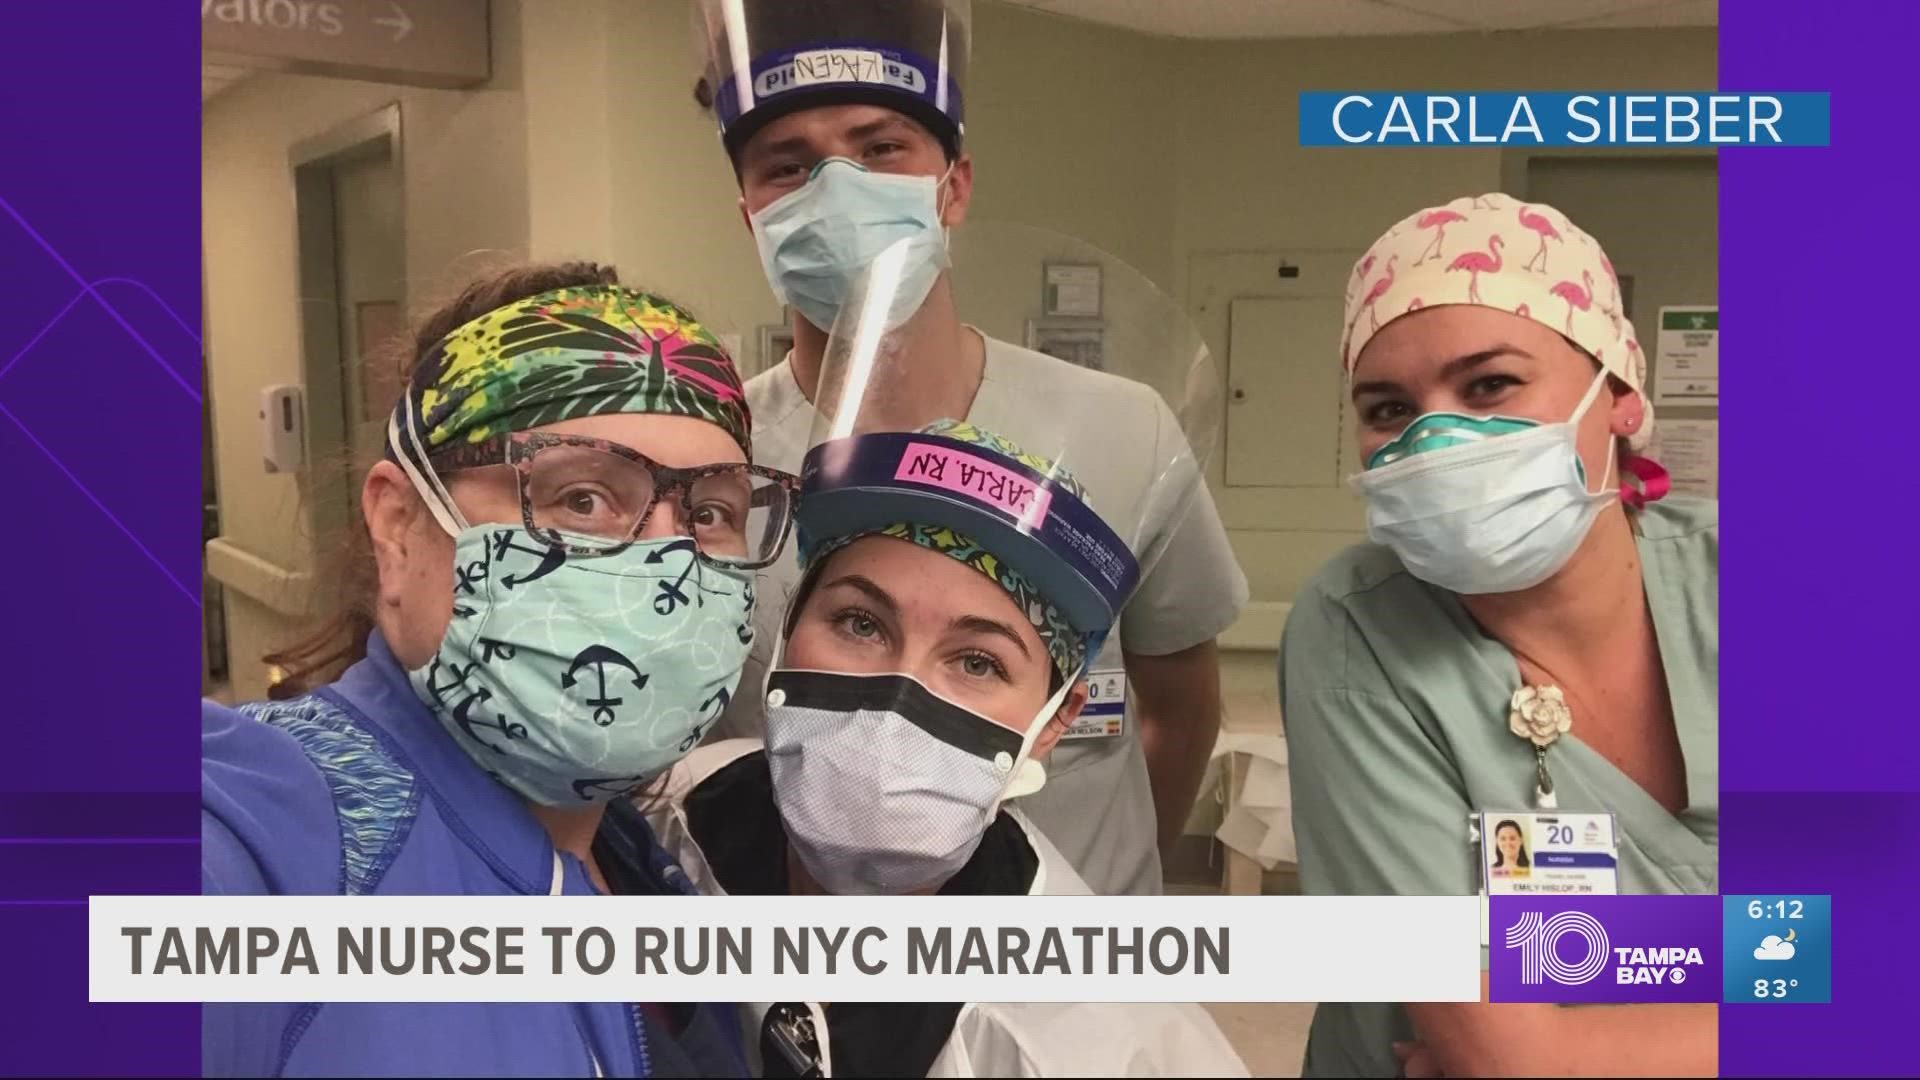 The last time Carla Sieber was in New York, the streets were empty and the hospital beds were full. Now, she is returning to run her first marathon.